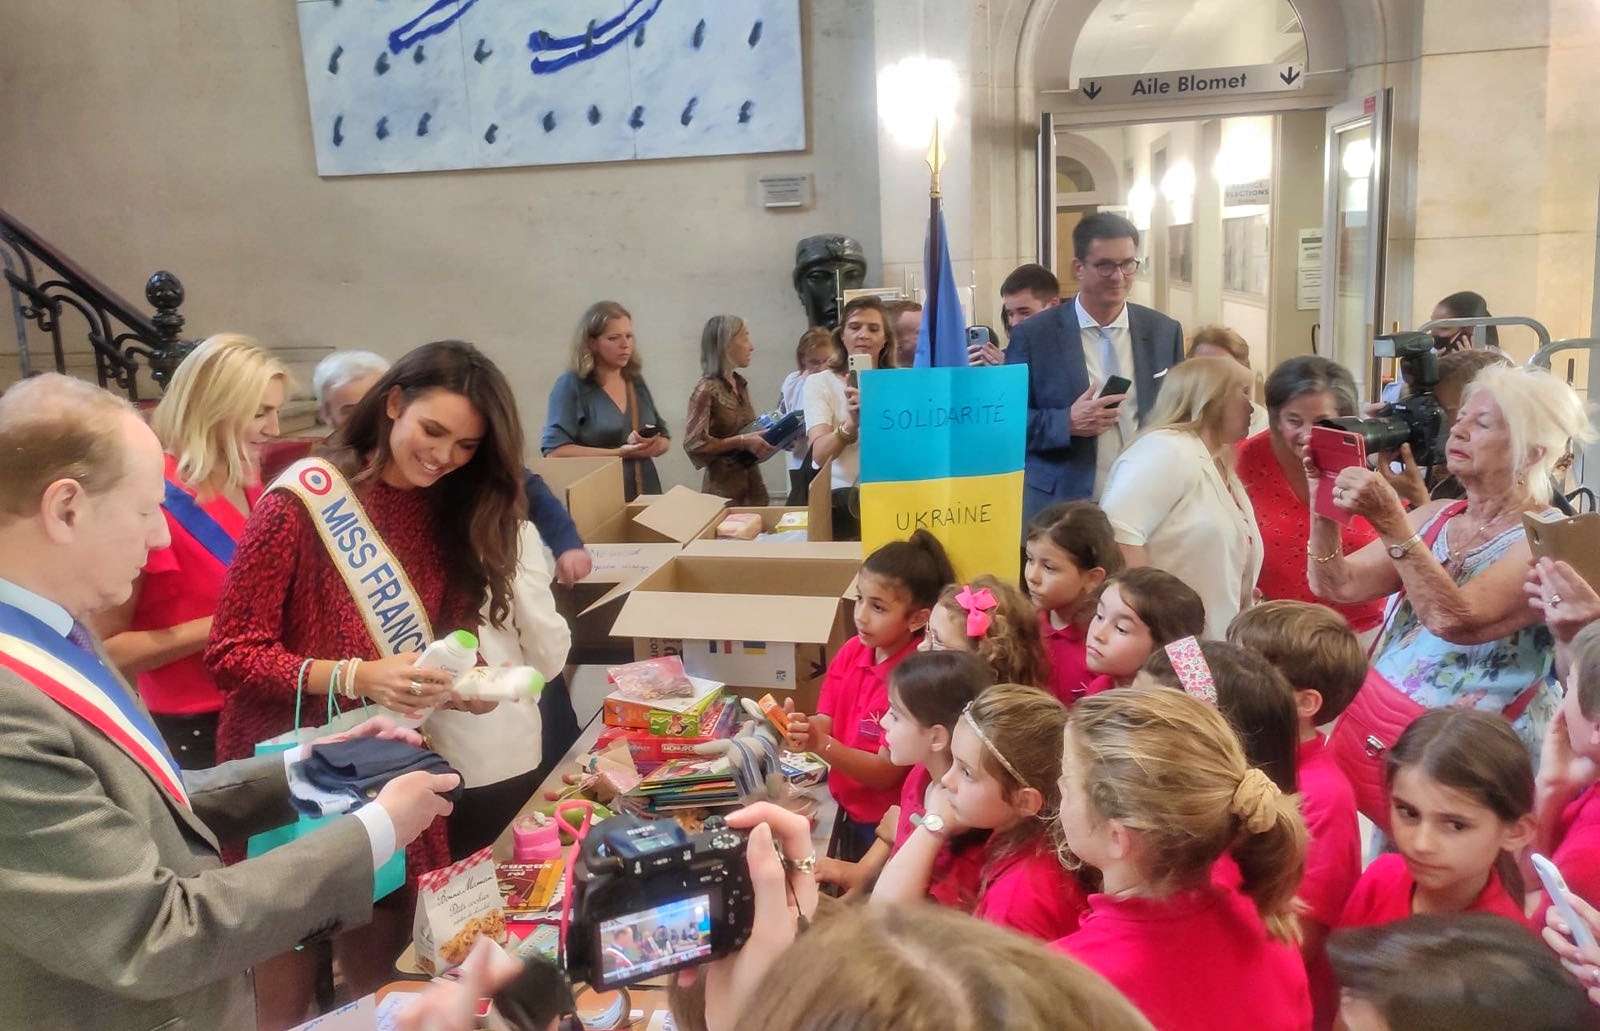 United by good deeds: humanitarian cargo was sent to Ukraine by Miss France